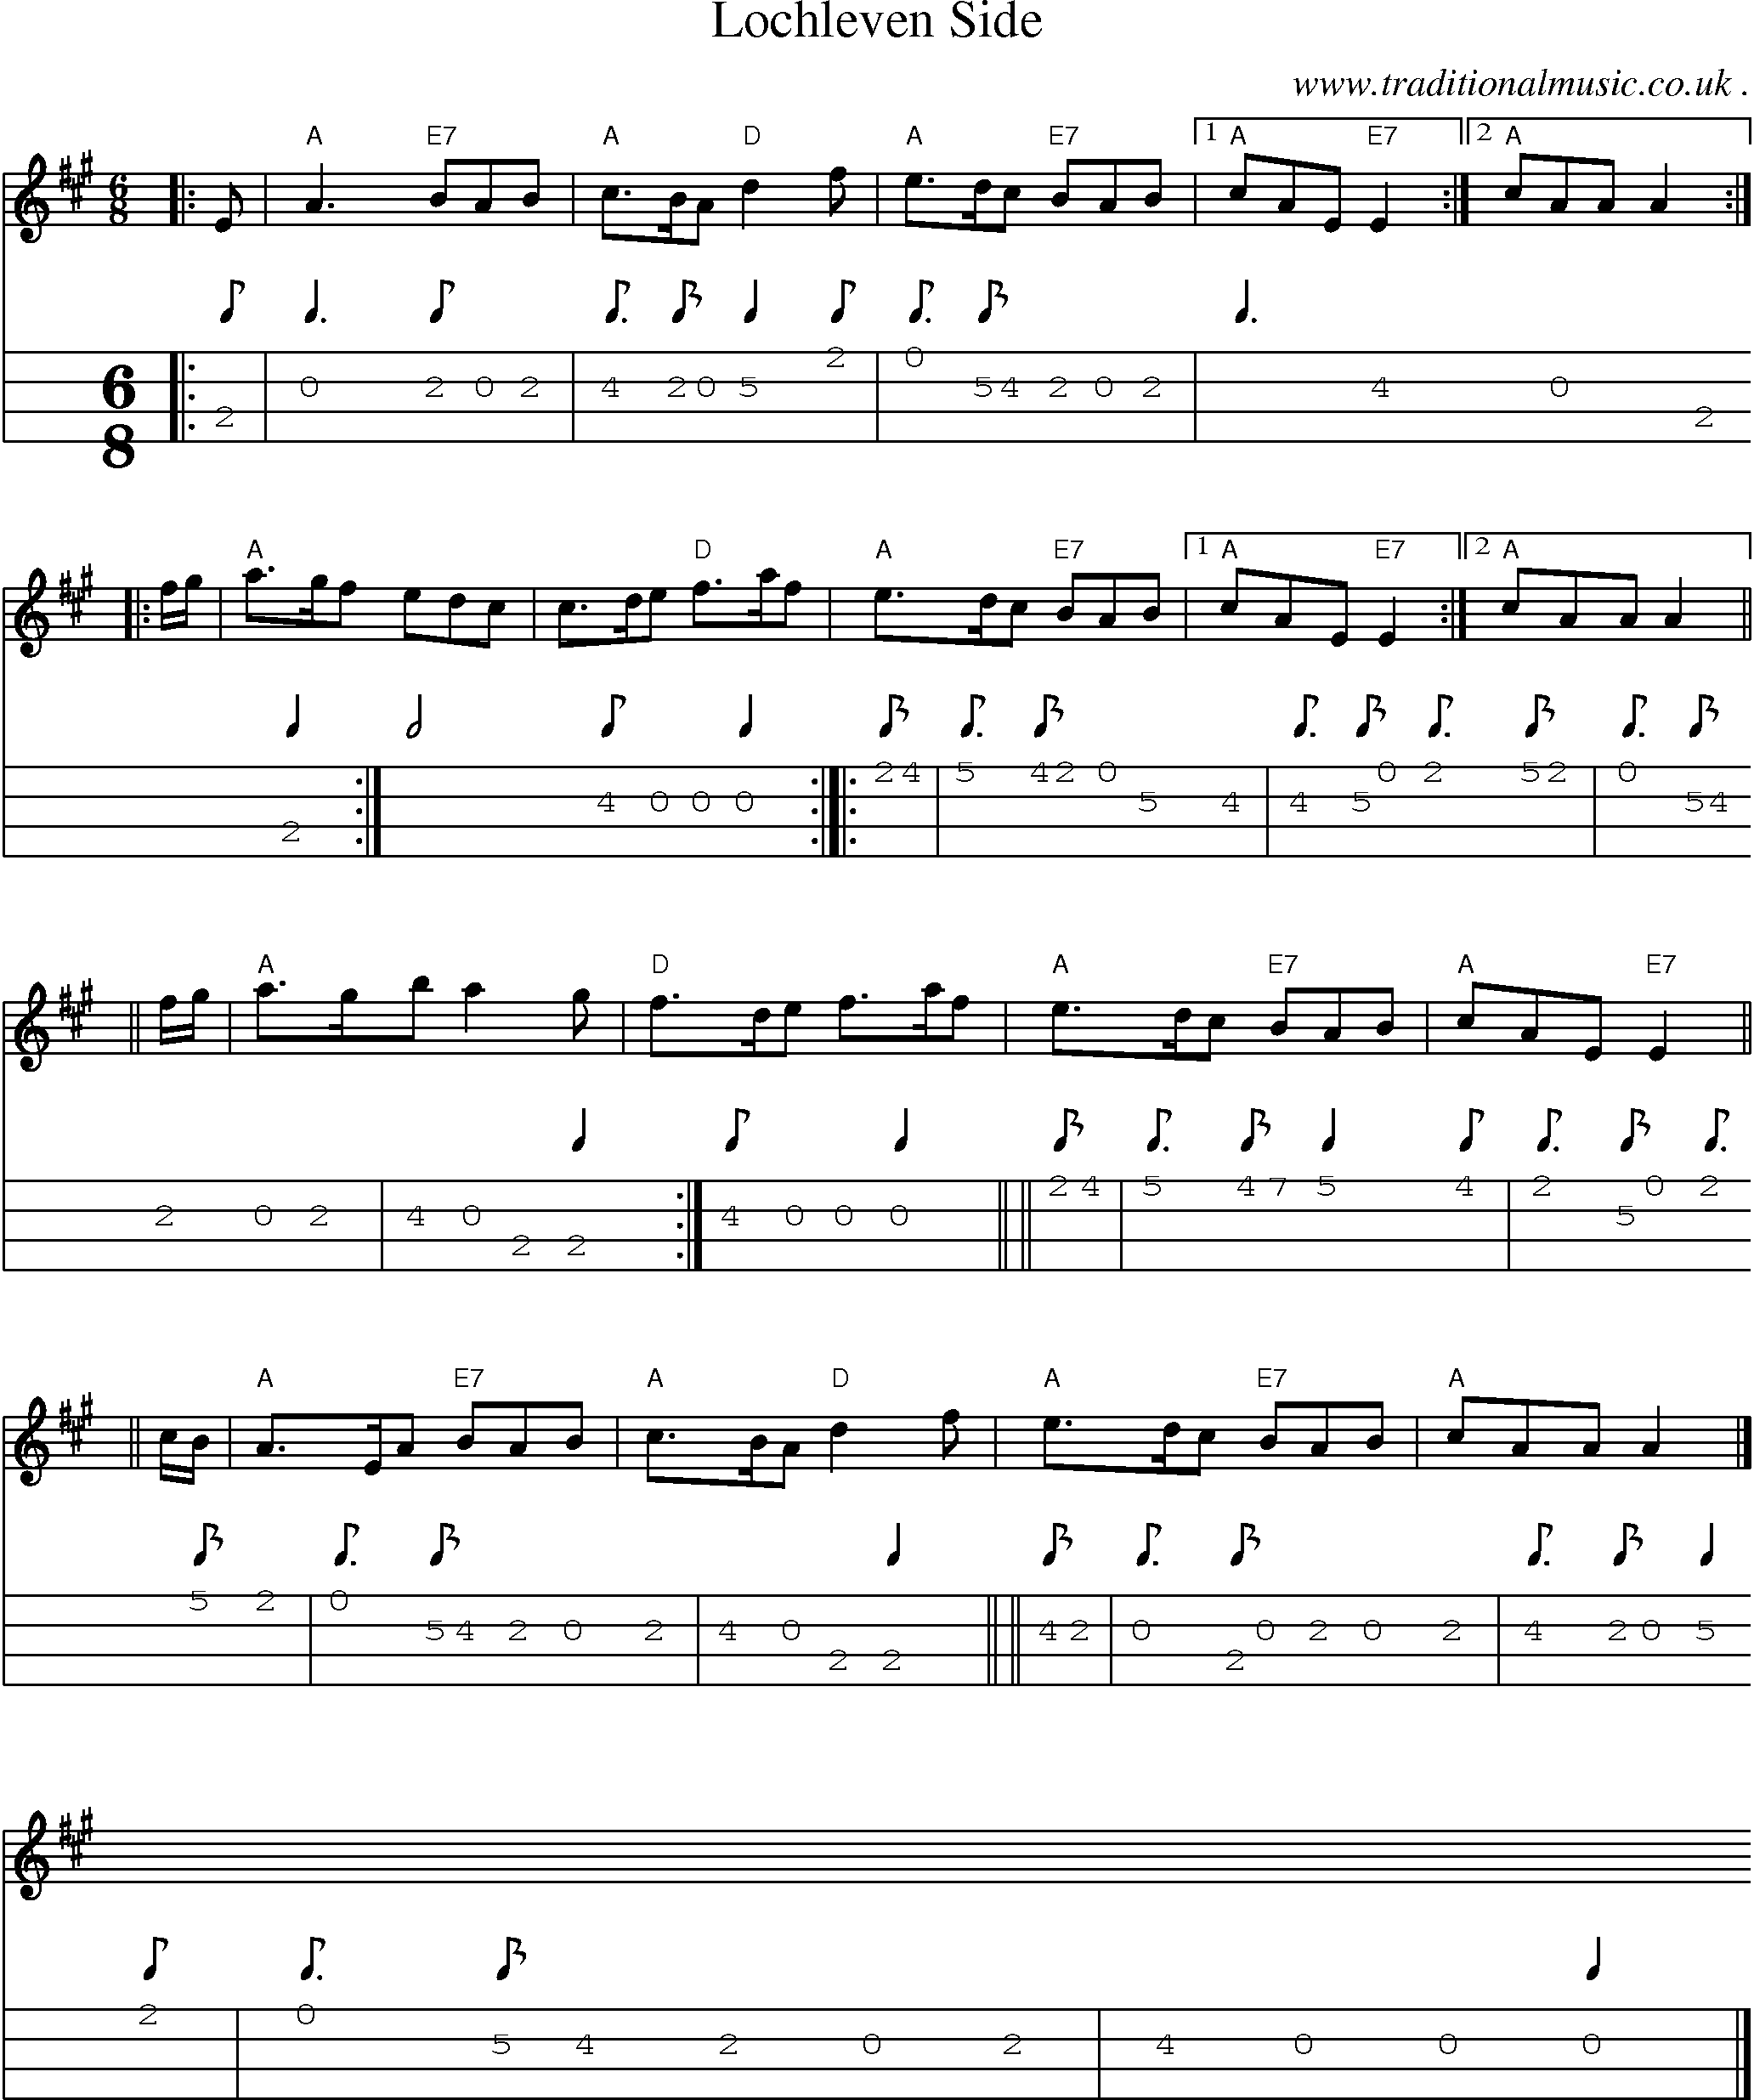 Sheet-music  score, Chords and Mandolin Tabs for Lochleven Side